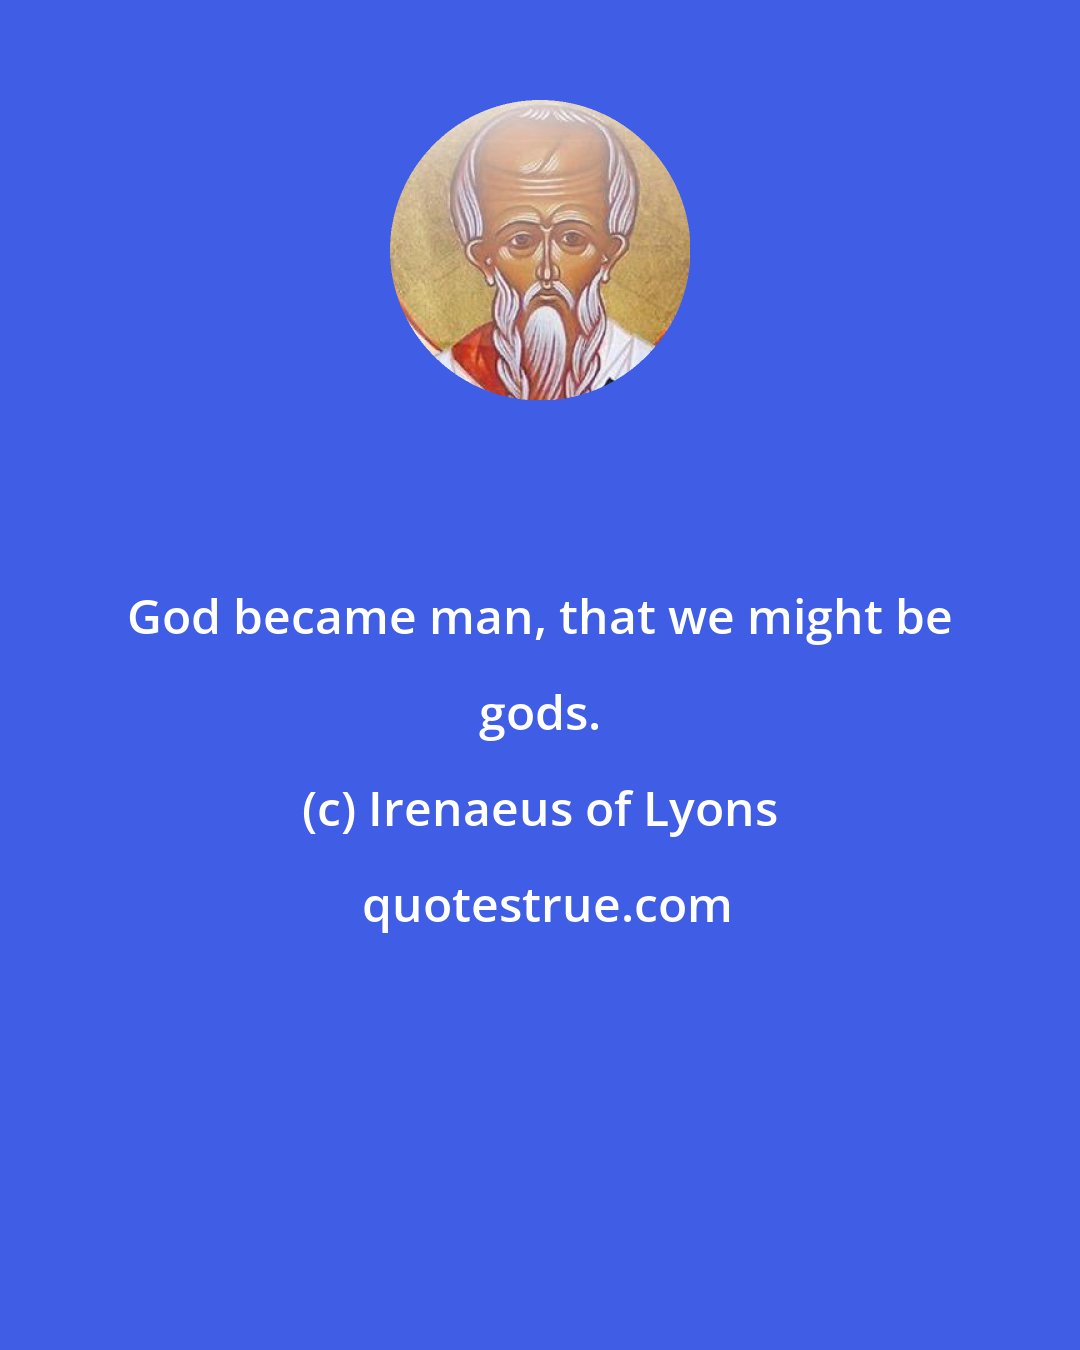 Irenaeus of Lyons: God became man, that we might be gods.